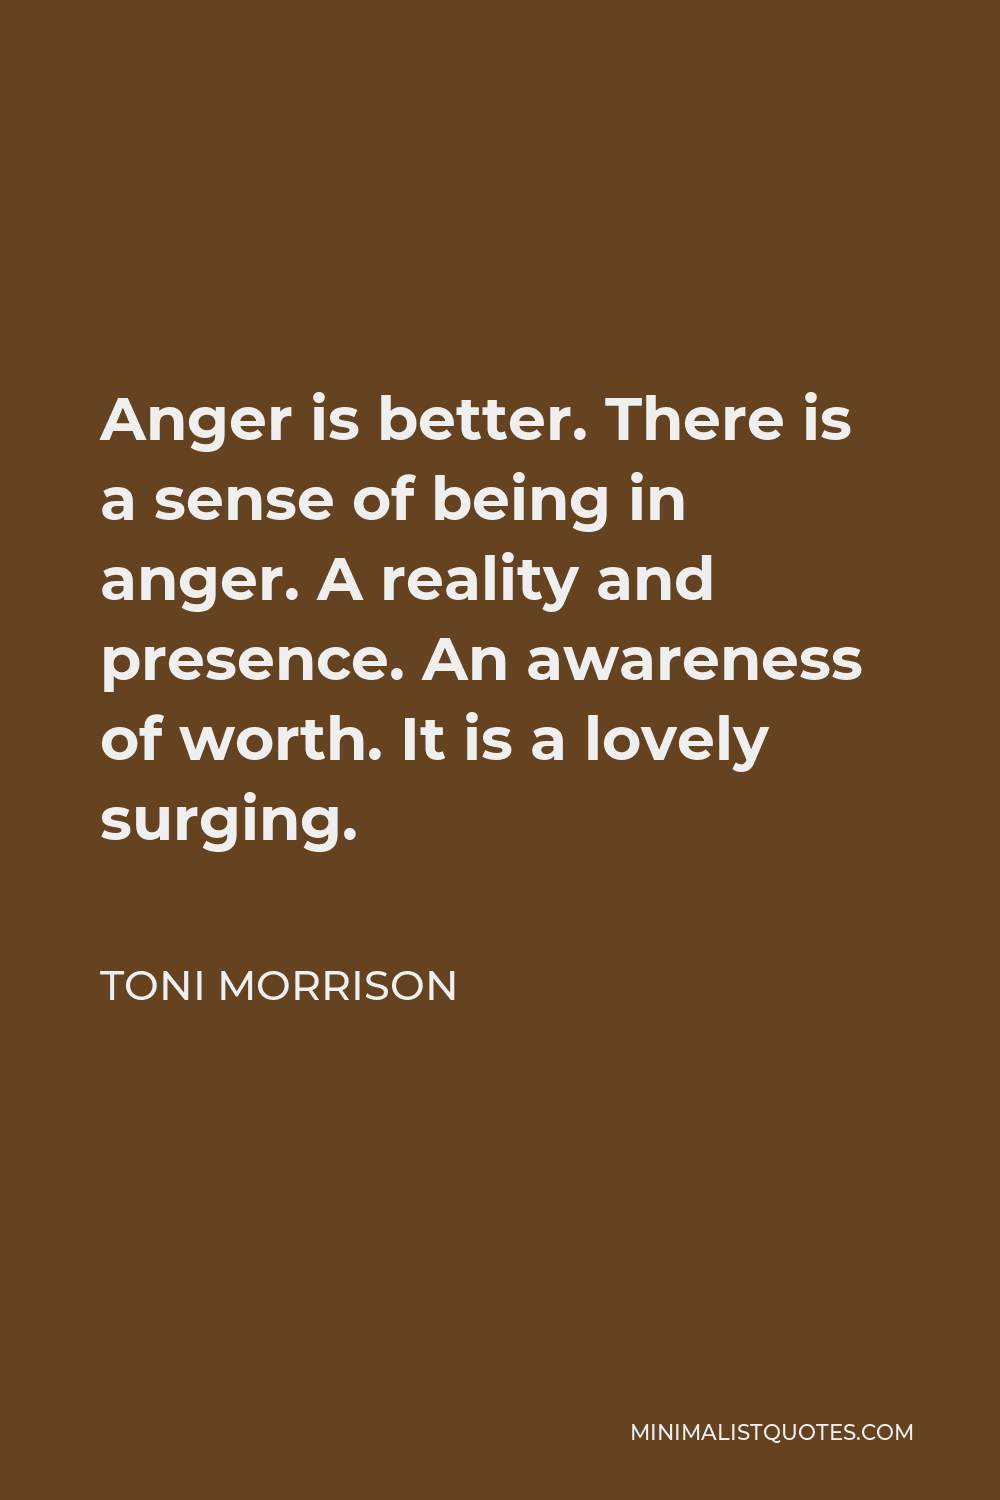 Toni Morrison Quote - Anger is better. There is a sense of being in anger. A reality and presence. An awareness of worth. It is a lovely surging.